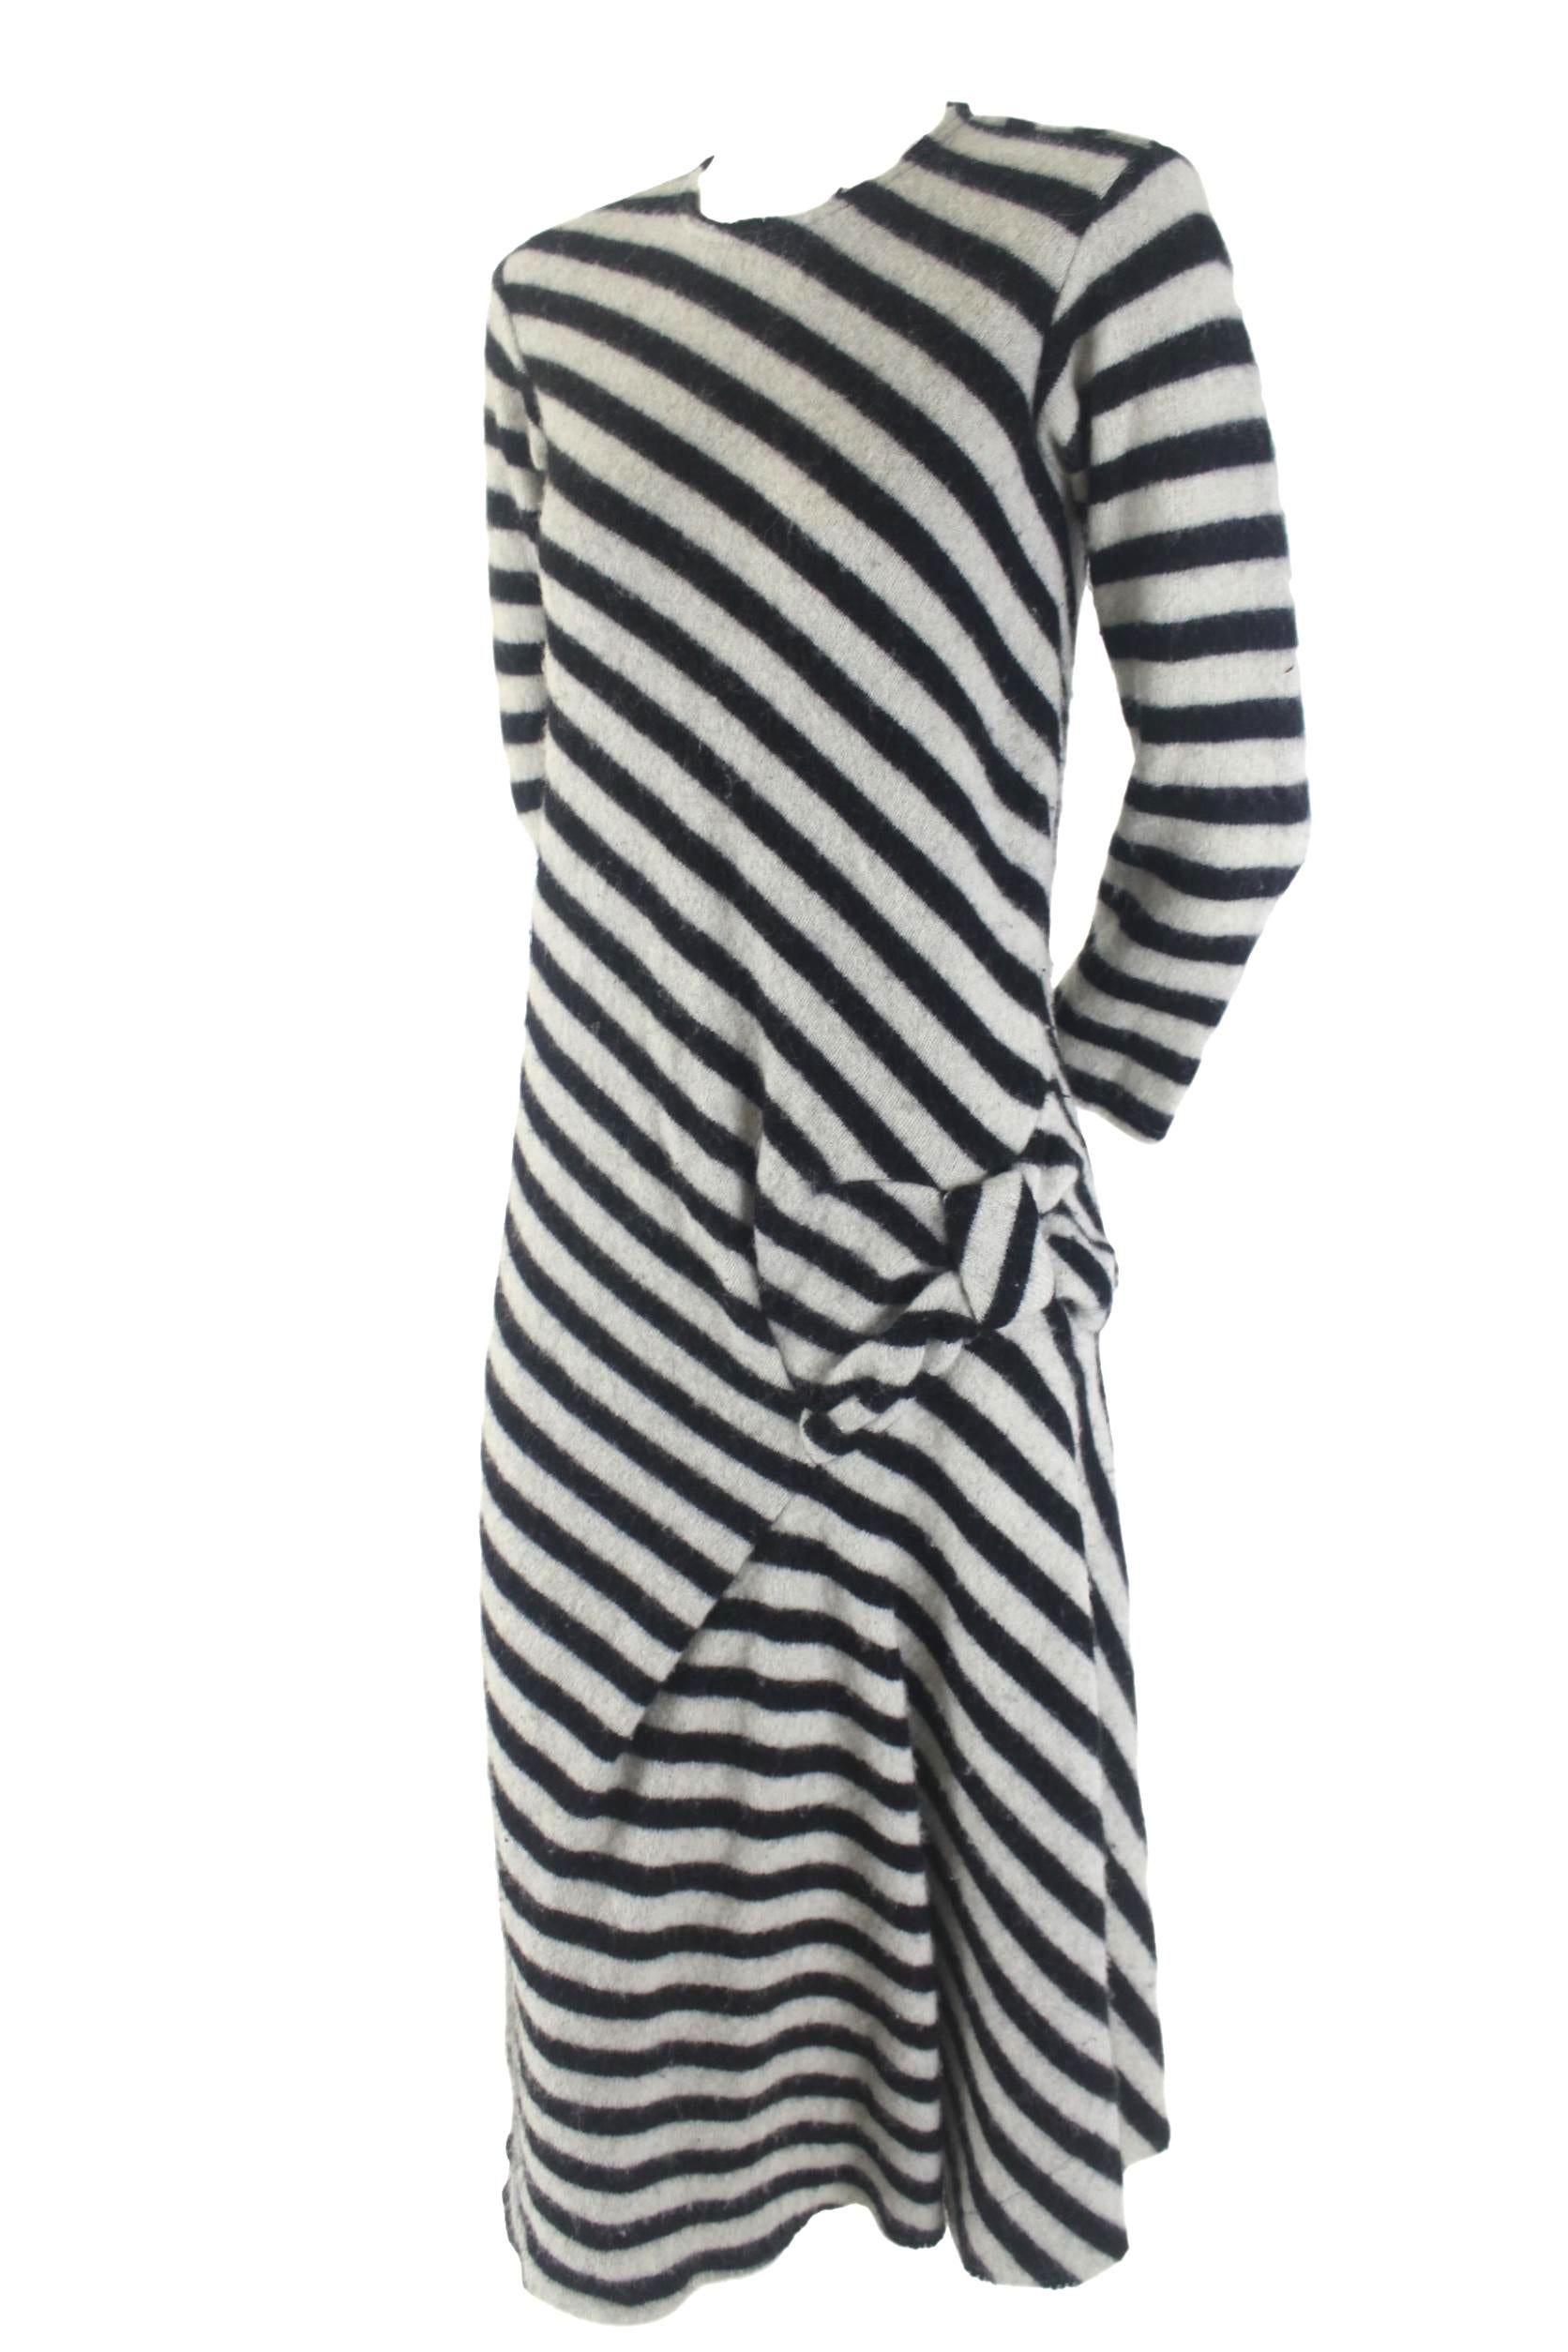 Junya Watanabe Comme des Garcons Wool Dress 2003 Collecction In Good Condition For Sale In Bath, GB